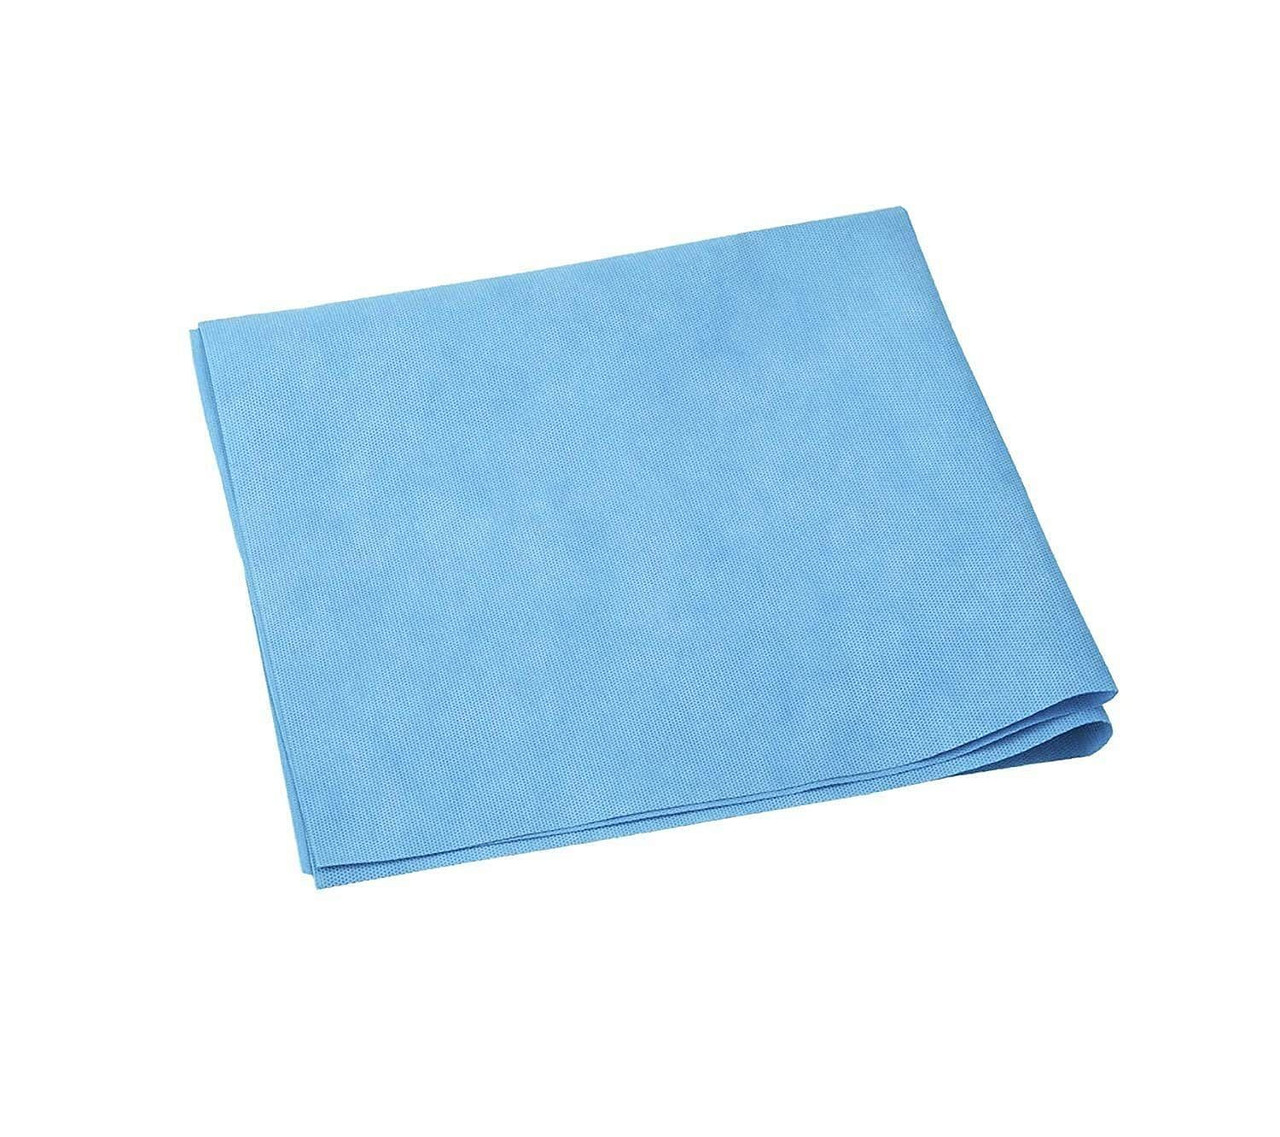 Sterilization Wraps 20" x 20" in Bulk. Pack of 500 Blue Non-Woven Pads for Surgical Instruments; Eq